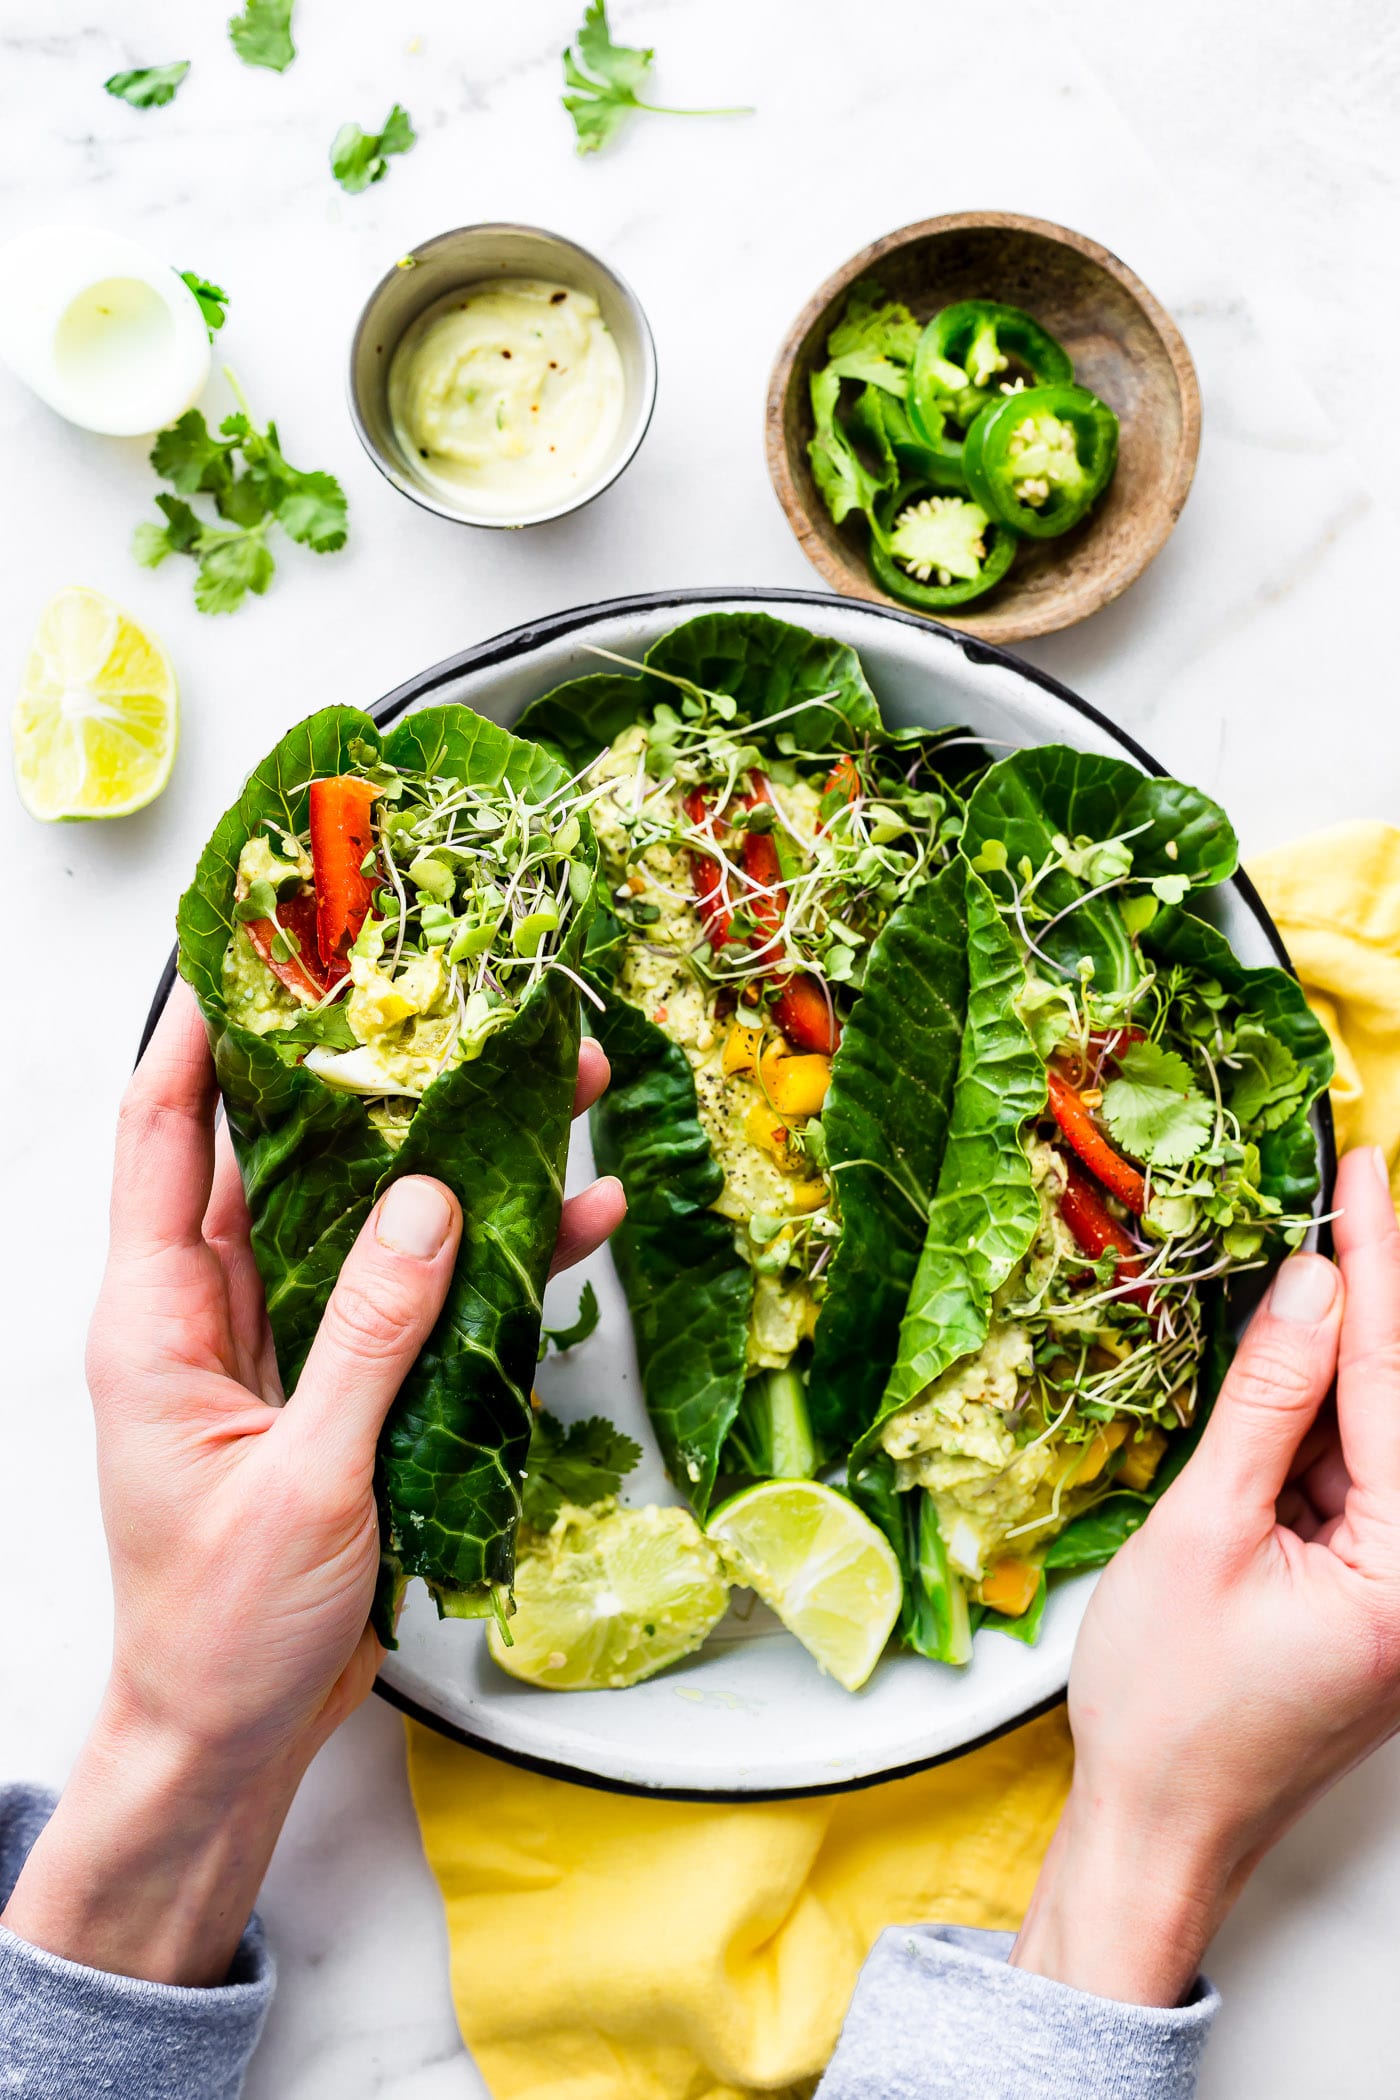 These Mexican avocado egg salad wraps make for a perfect low carb veggie packed lunch! Paleo Avocado Egg Salad seasoned with Mexican spices and jalapeño, then all wrapped up in collard greens! Whole 30 friendly.